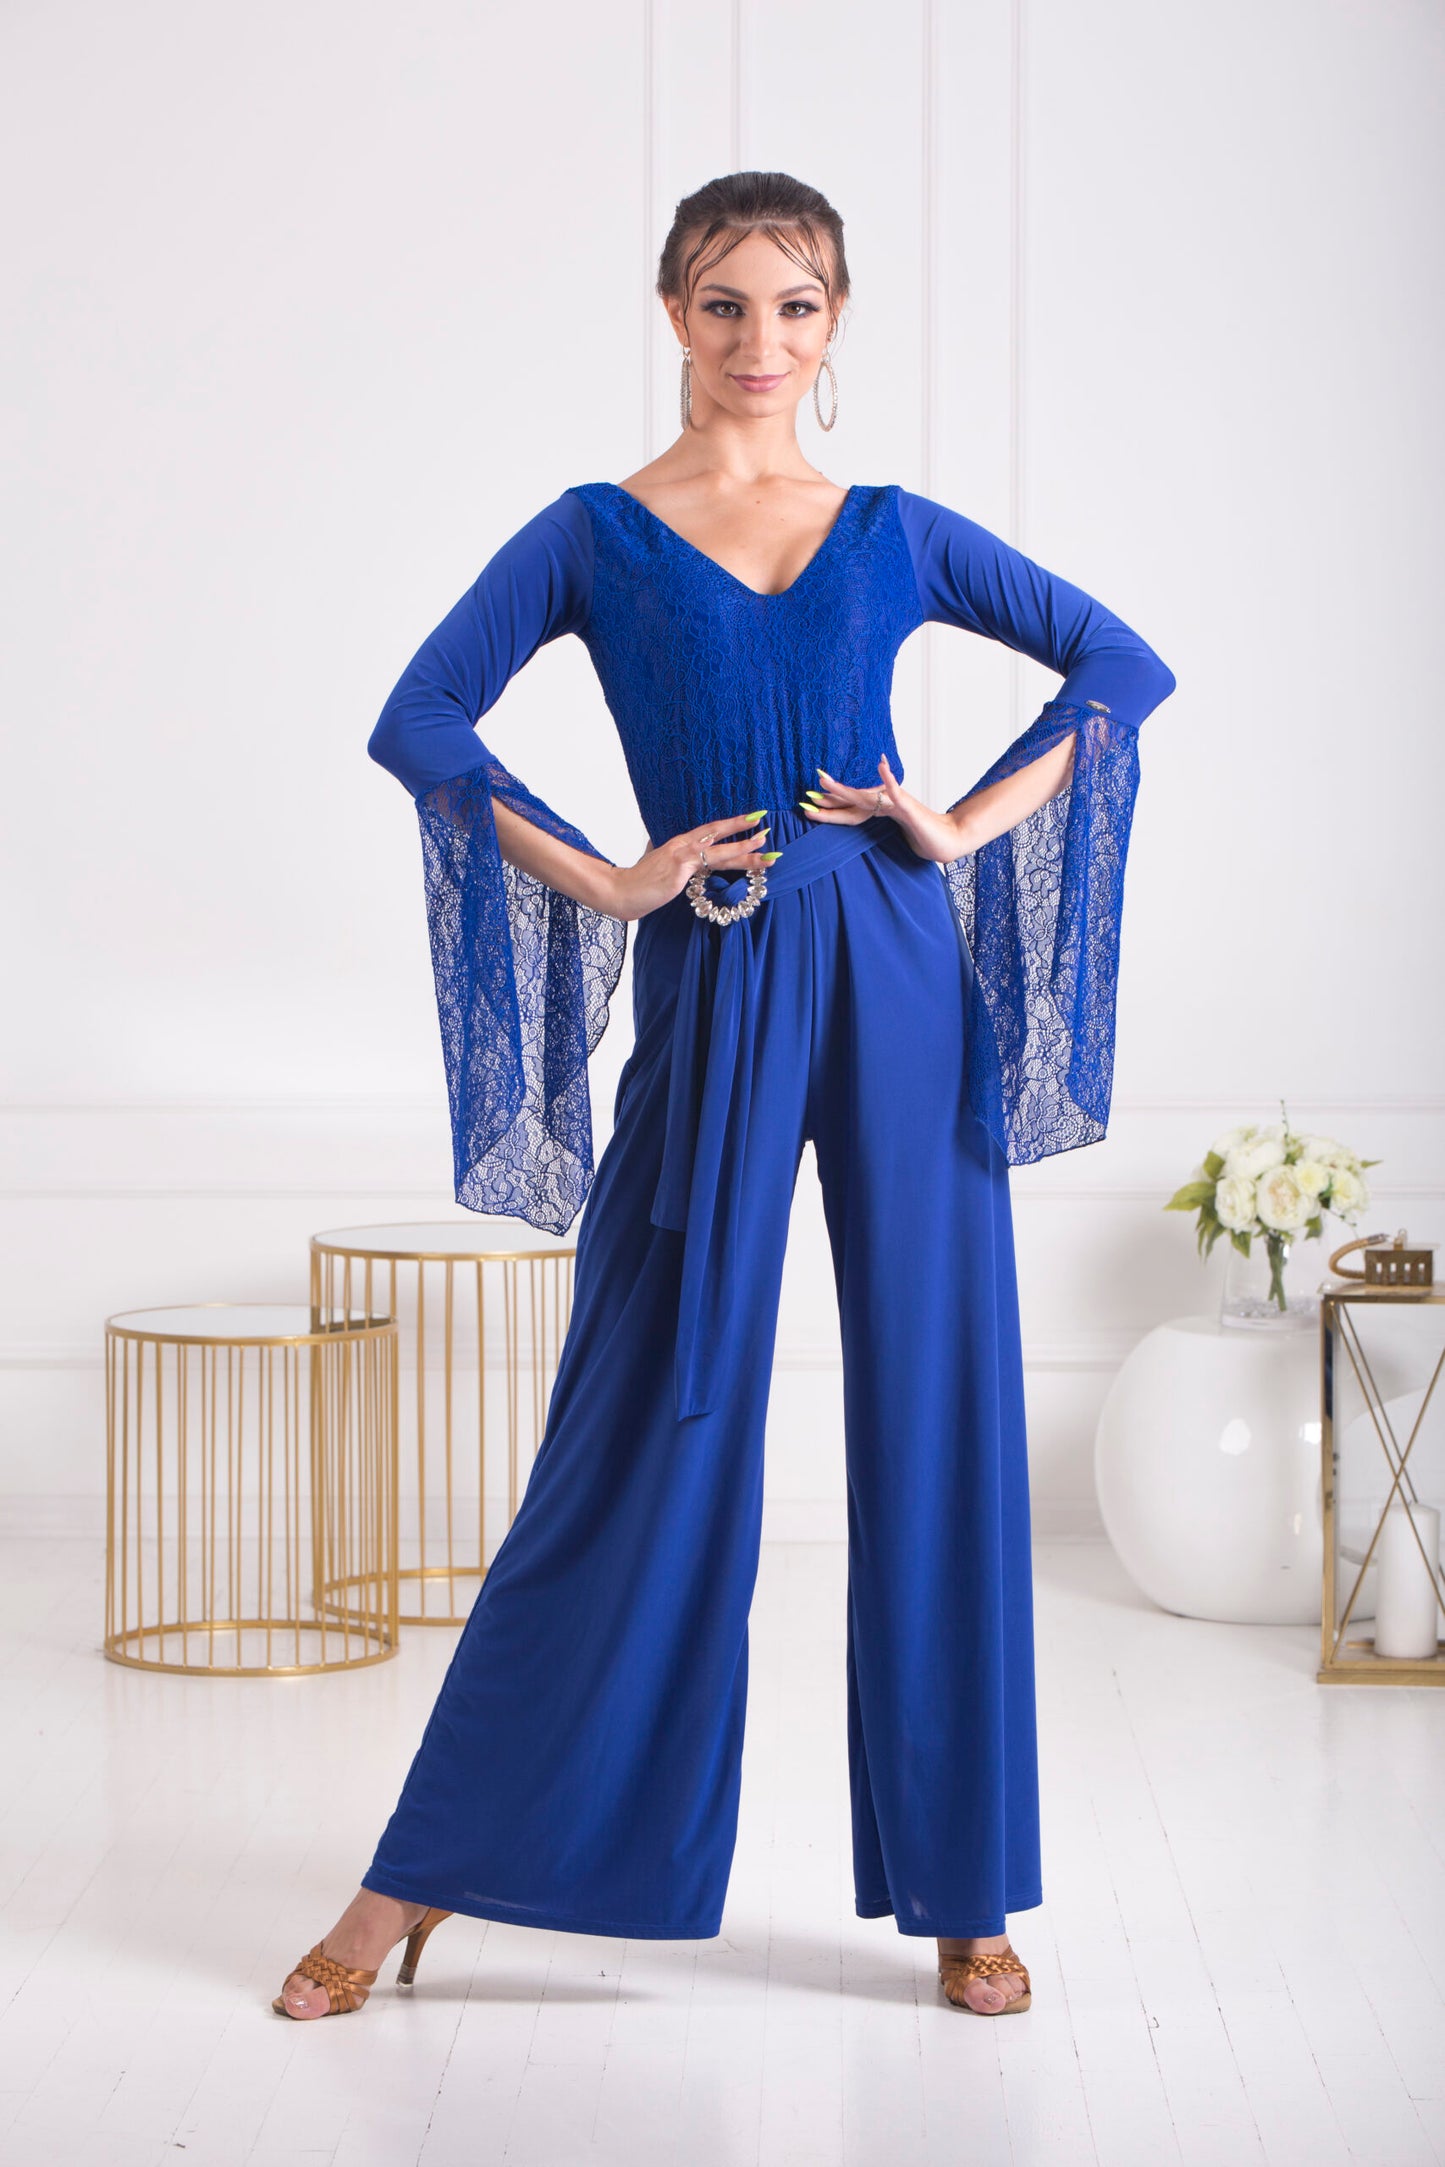 Senga Dancewear BLUET Jumpsuit with Wide Legs, Lace Sleeves, and Belt with Elegant Buckle PRA 1069 in Stock